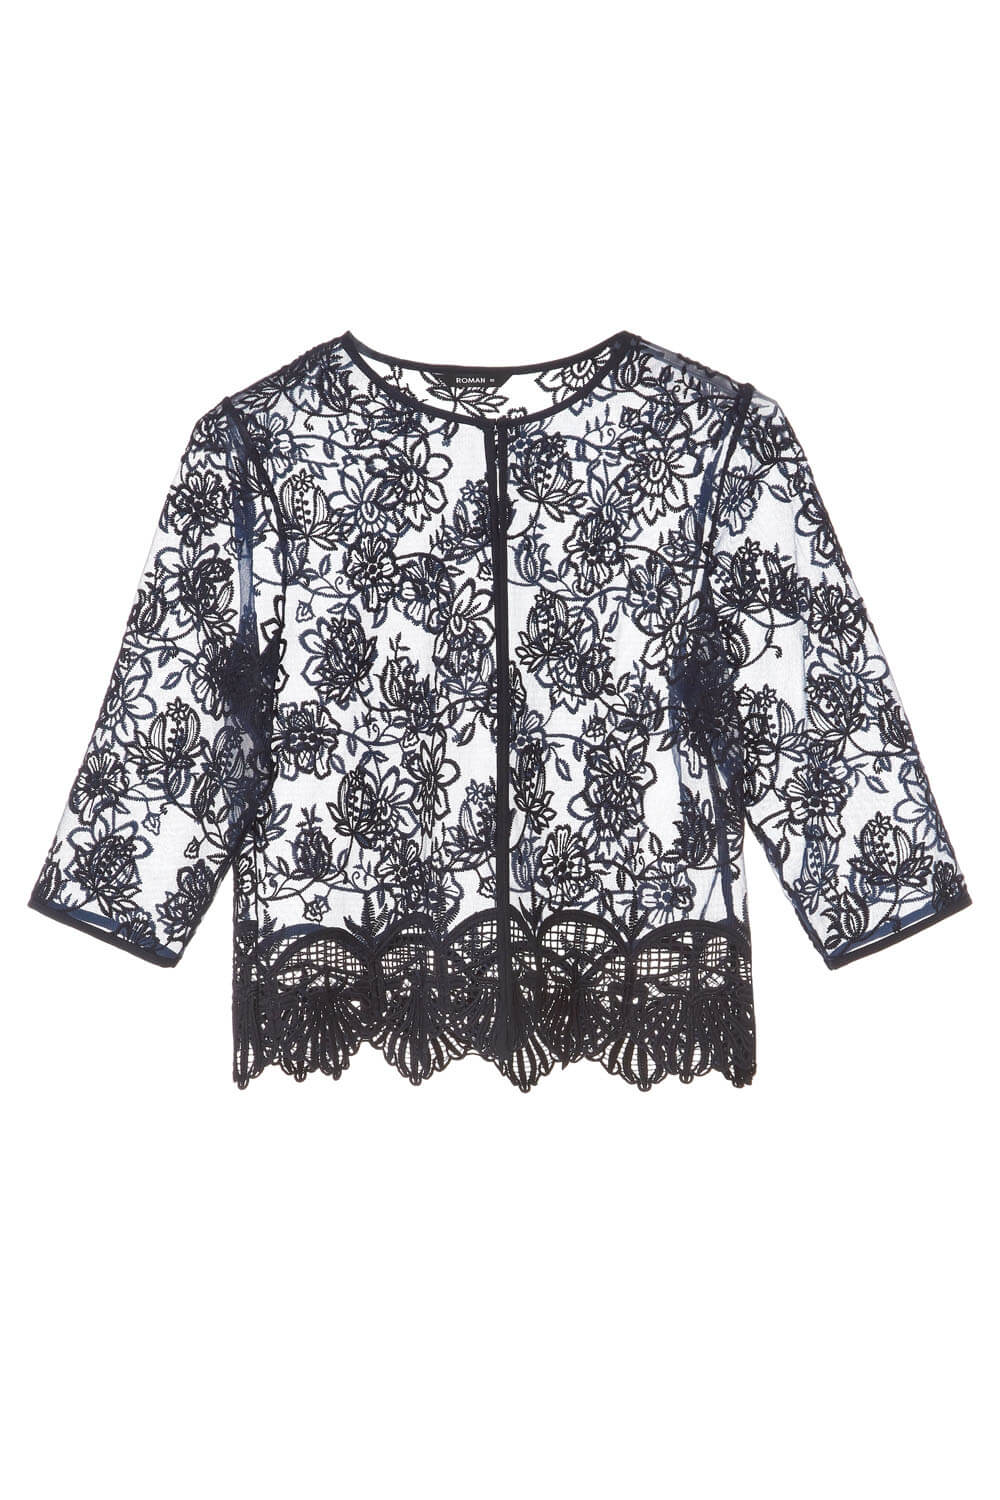 Navy  Short Floral Embroidered Lace Jacket, Image 5 of 5